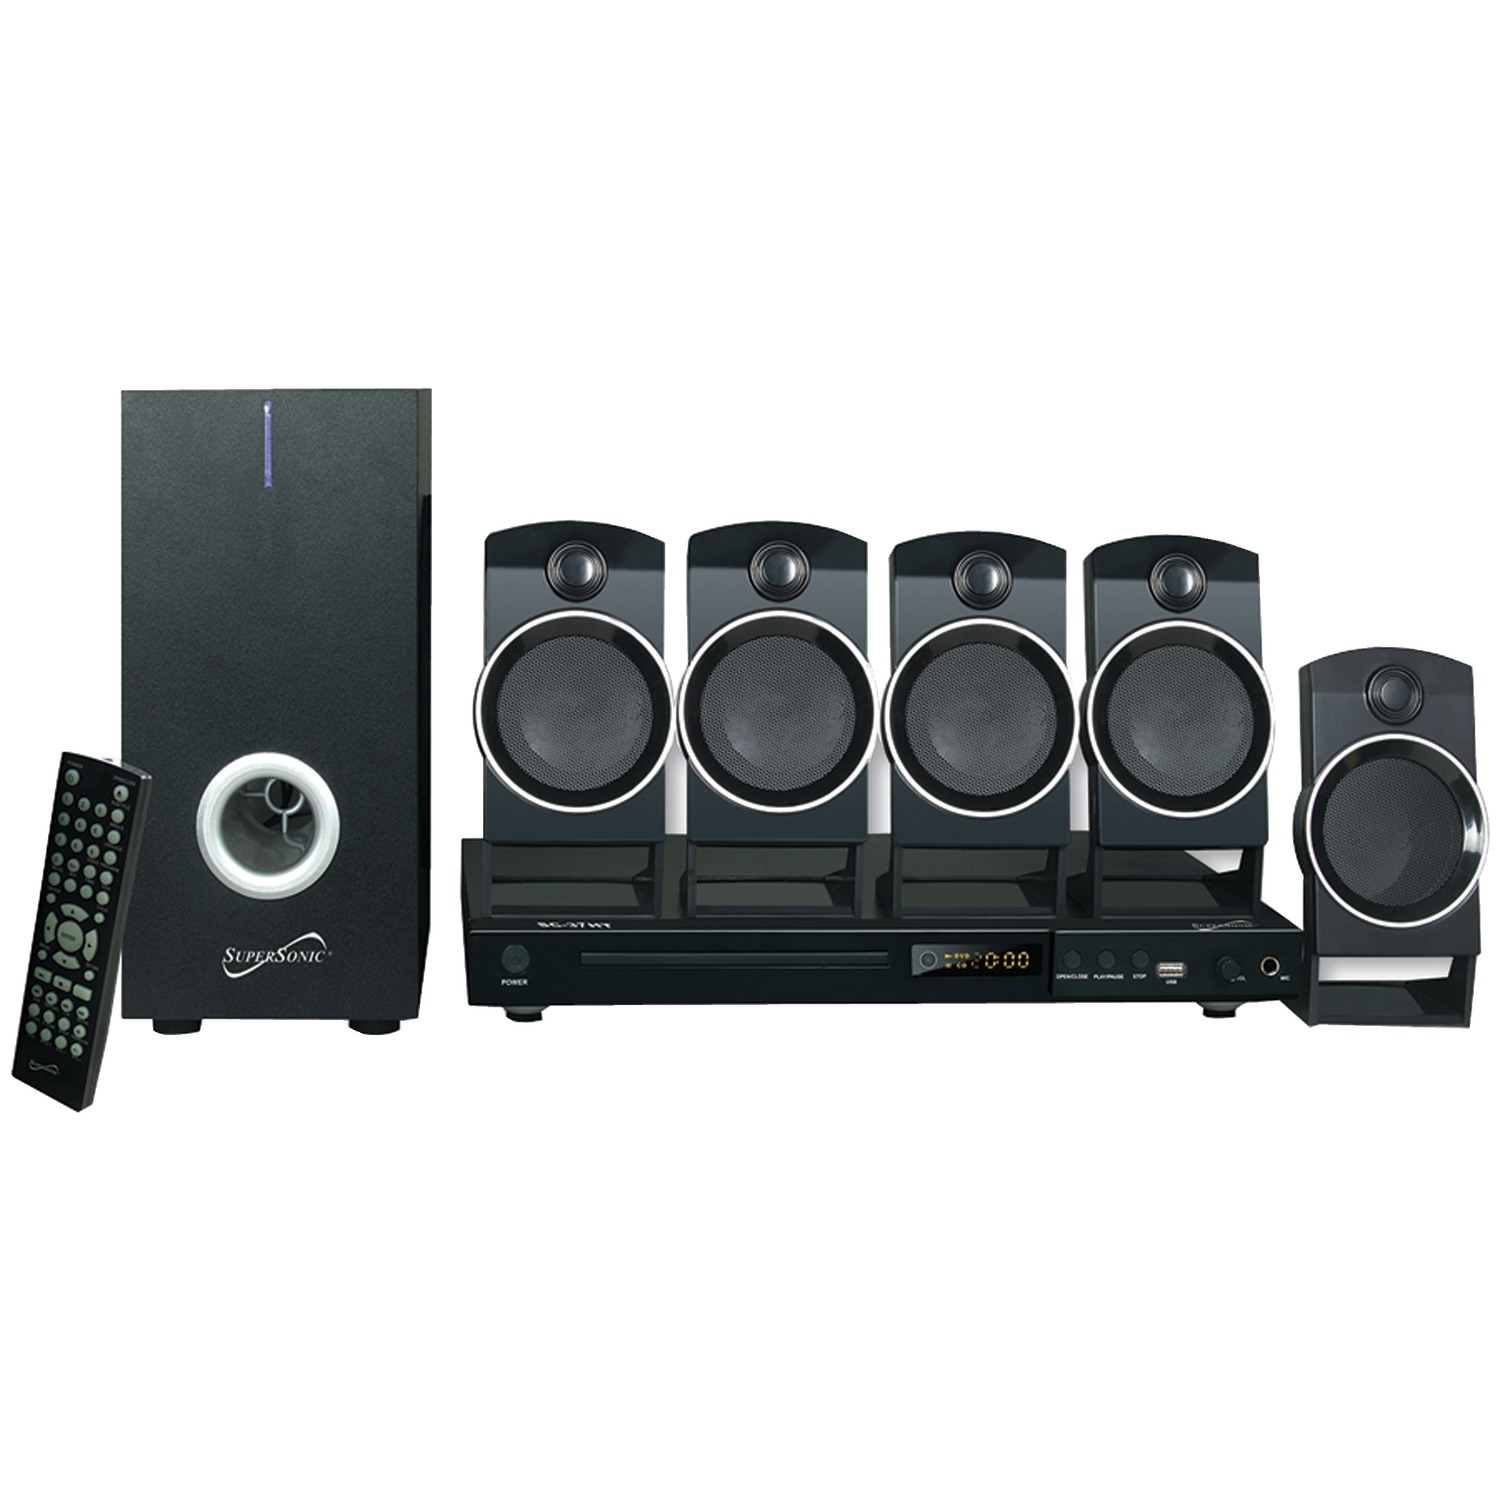 Supersonic Sc-37ht 5.1-Channel DVD Home Theater System - image 1 of 1